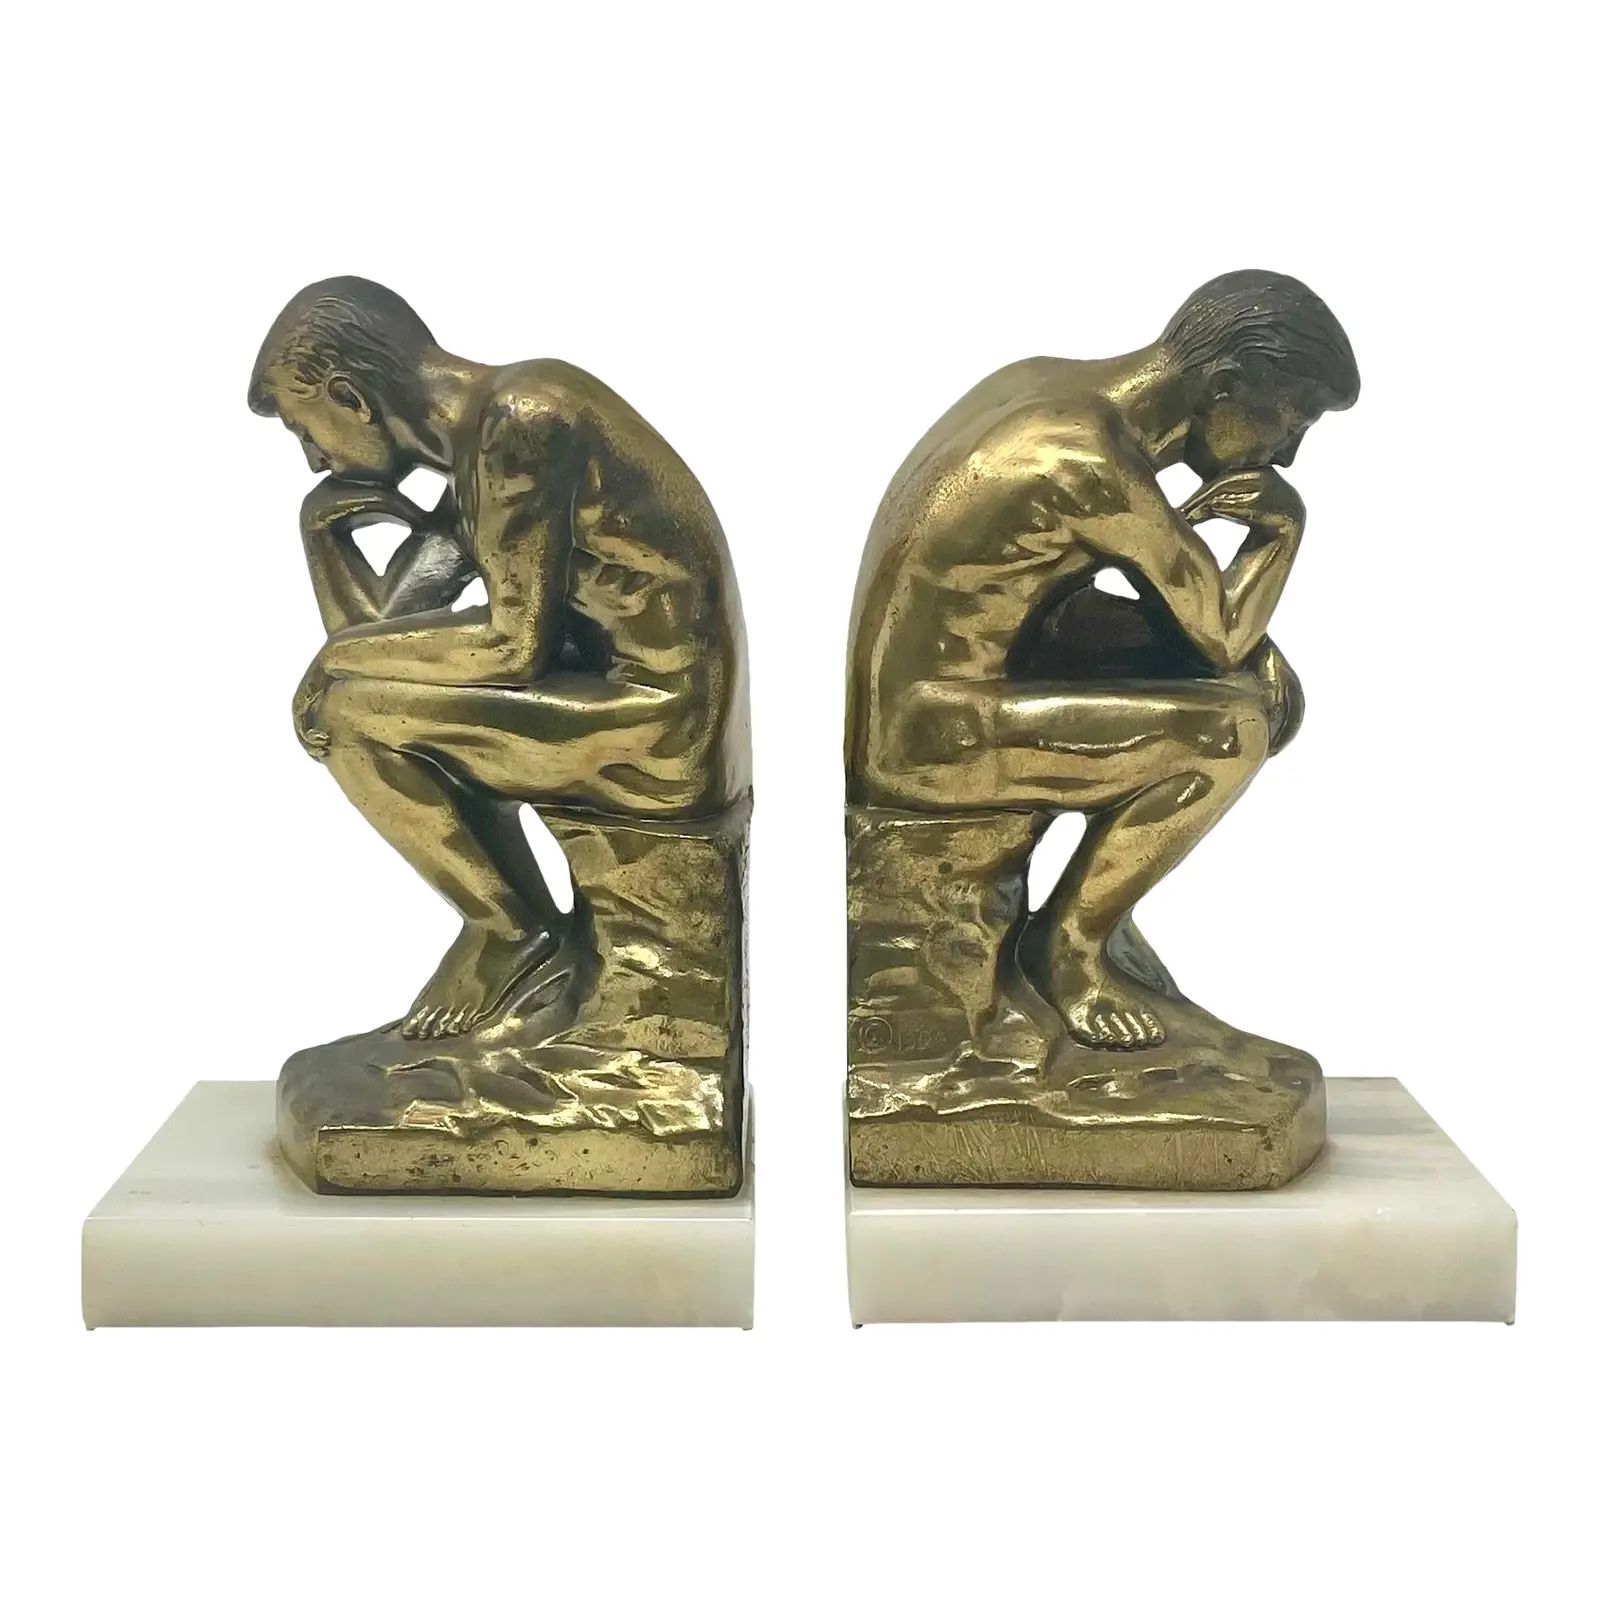 1920s "The Thinker" Brass Statue Marble Base Bookends After Rodin - Set of 2 | Chairish